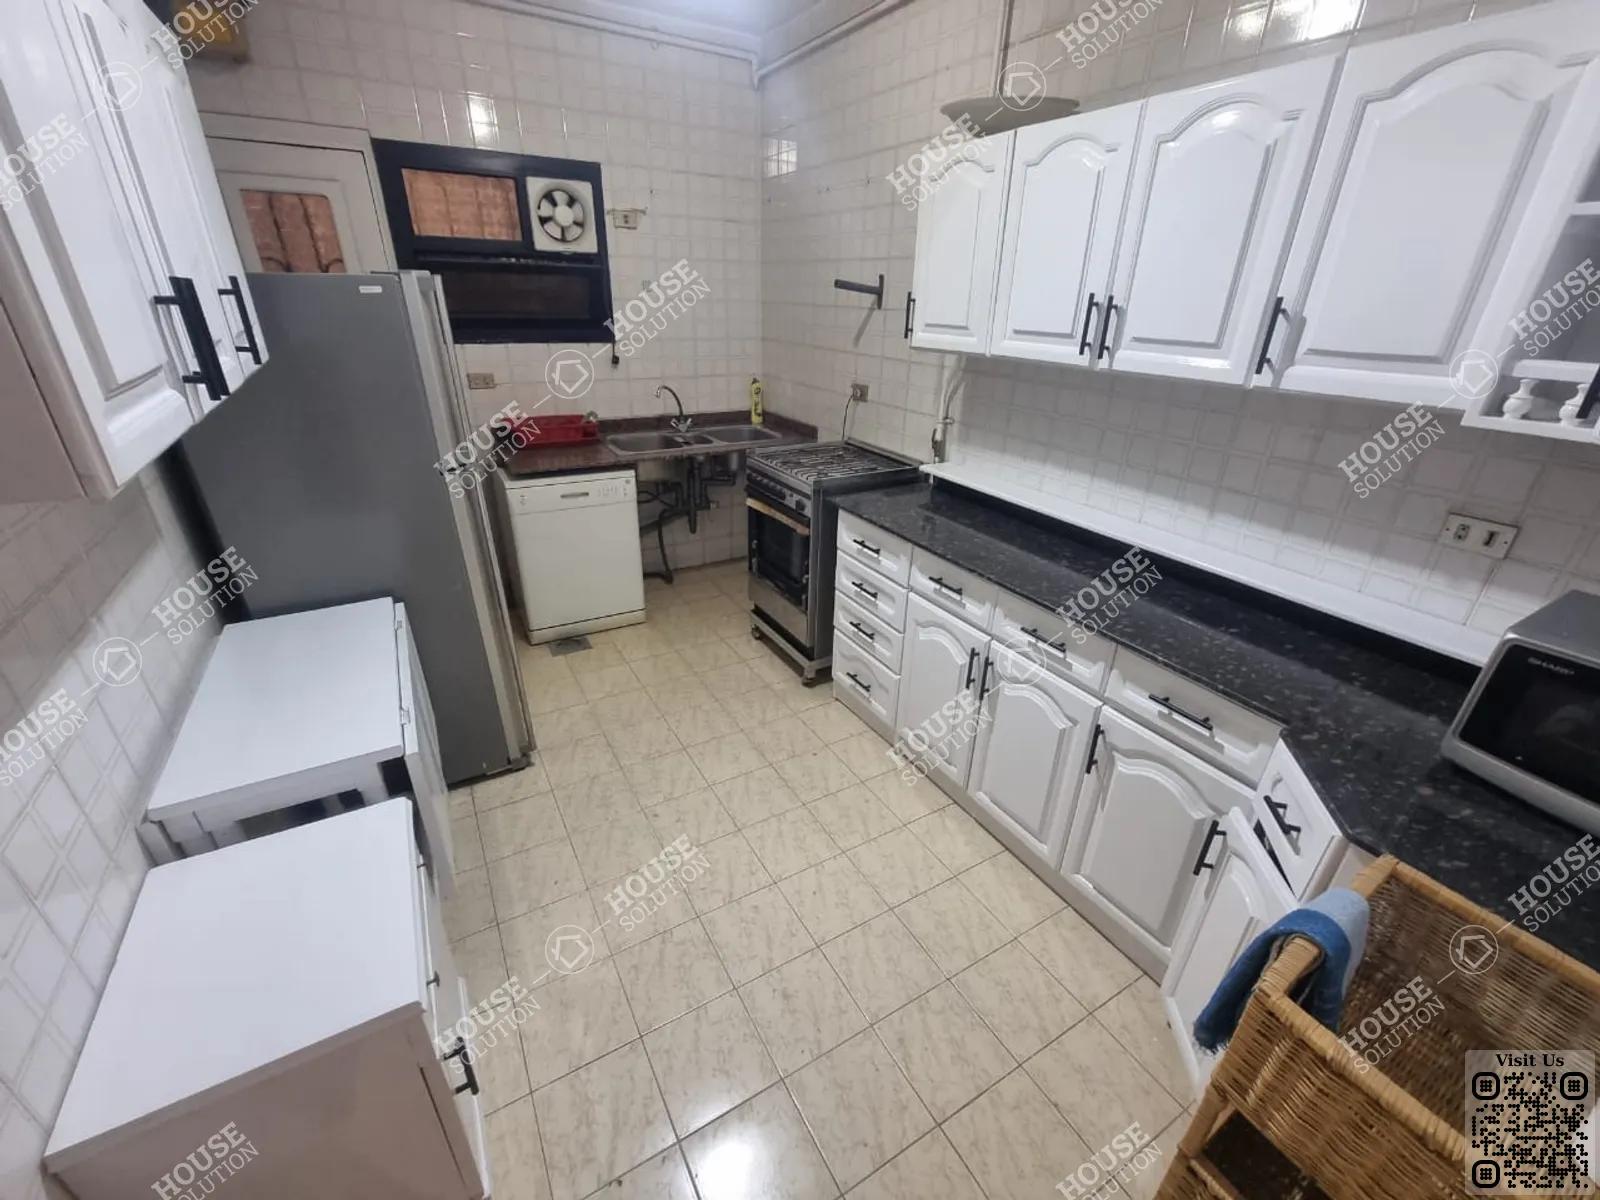 KITCHEN  @ Apartments For Rent In Maadi Maadi Sarayat Area: 220 m² consists of 3 Bedrooms 3 Bathrooms Furnished 5 stars #5773-1